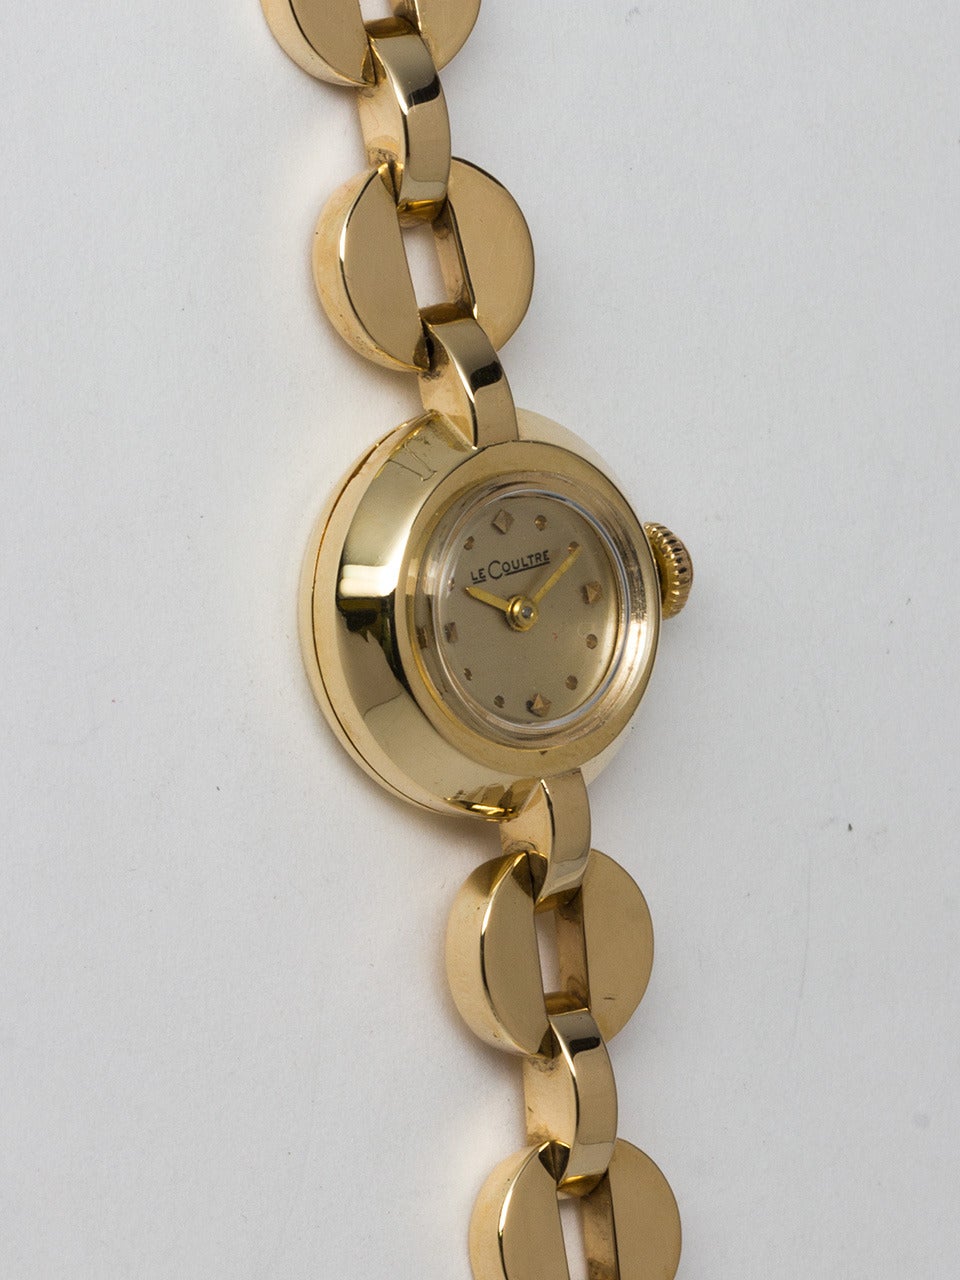 LeCoultre 14K Yellow Gold Lady's Dress Wristwatch circa 1940s. 18mm diameter dome shaped stepped case. Silvered dial with applied gold indexes and hands. Powered by 17 jewel manual wind movement. With yellow gold round disk shaped links and black